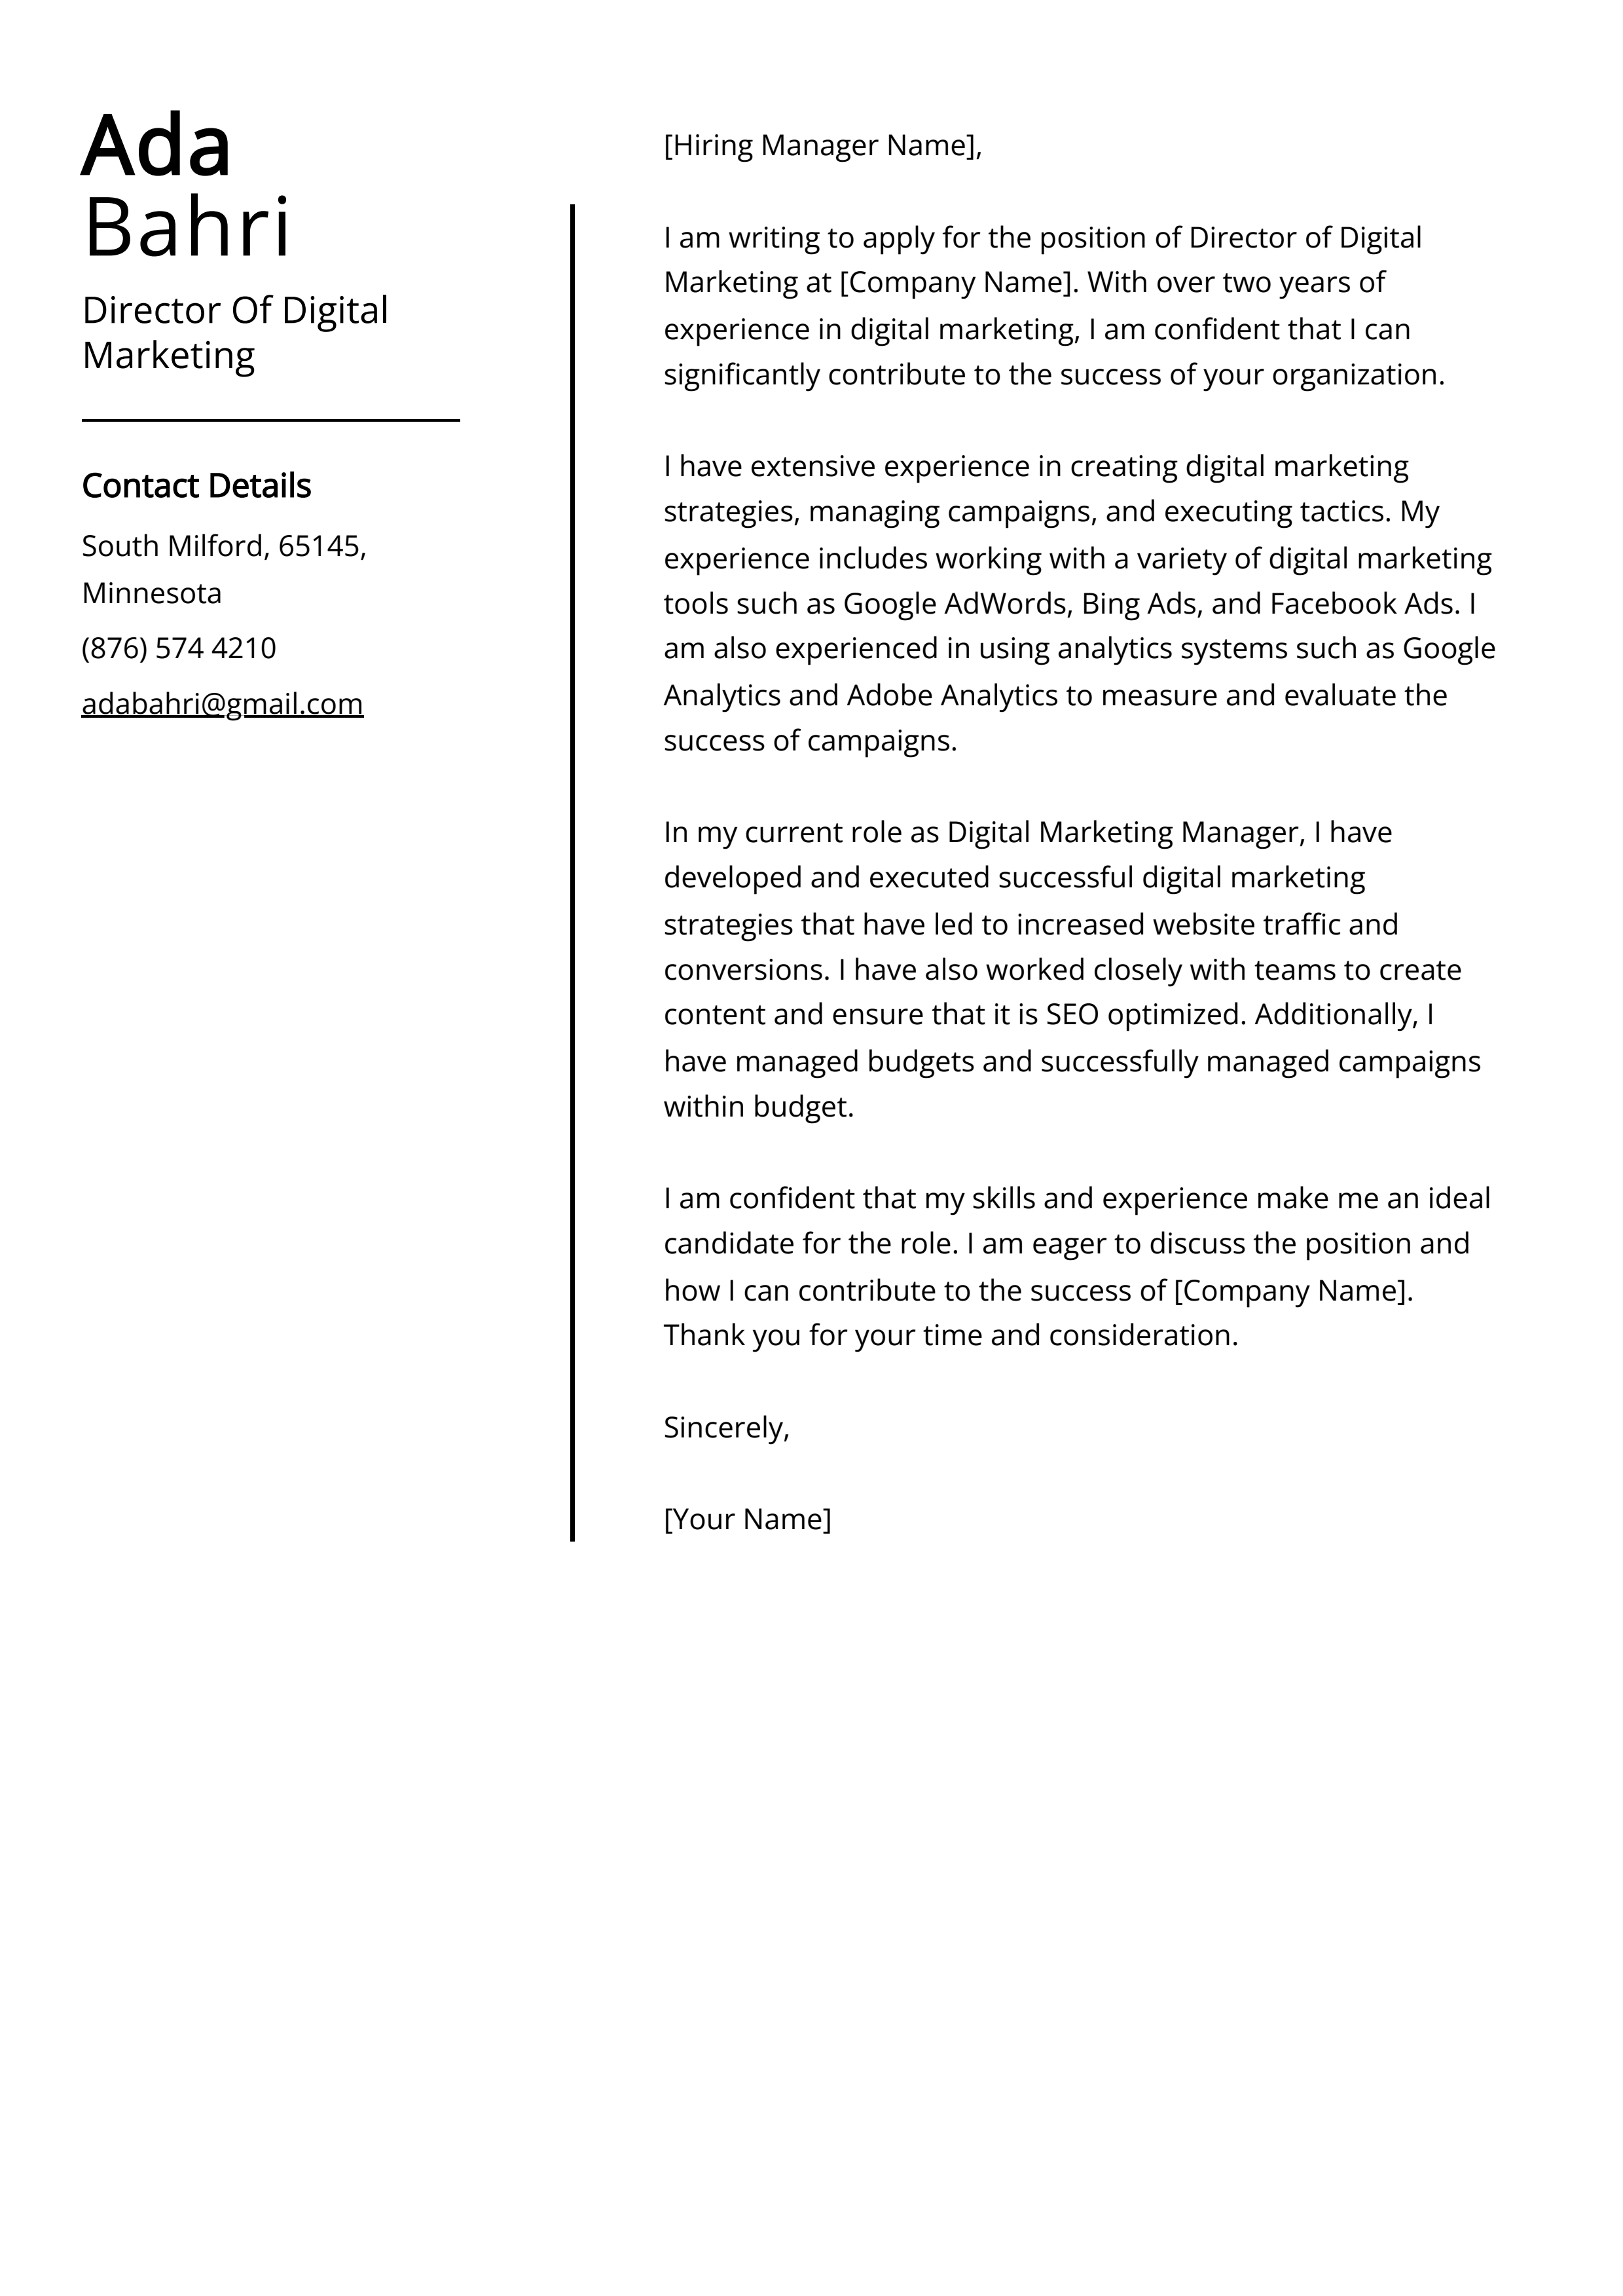 Director Of Digital Marketing Cover Letter Example